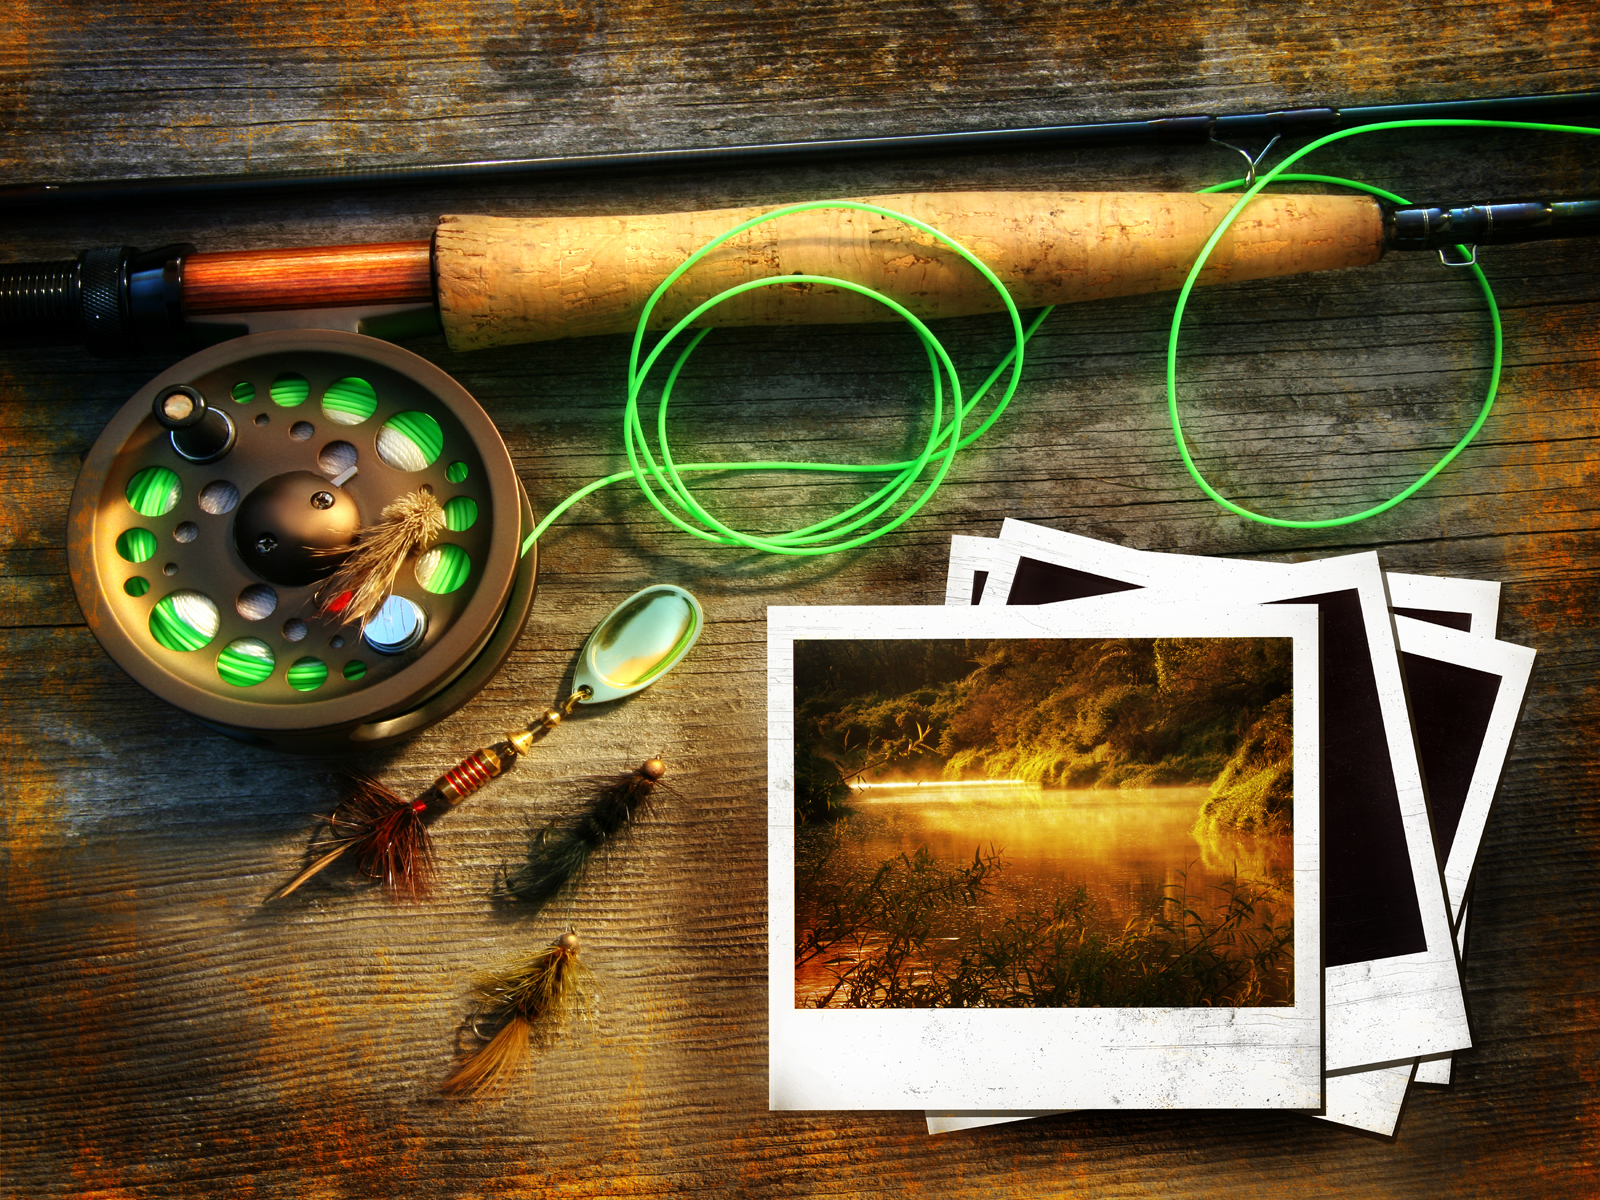 47+ Free Trout Fishing Wallpaper Backgrounds on ...